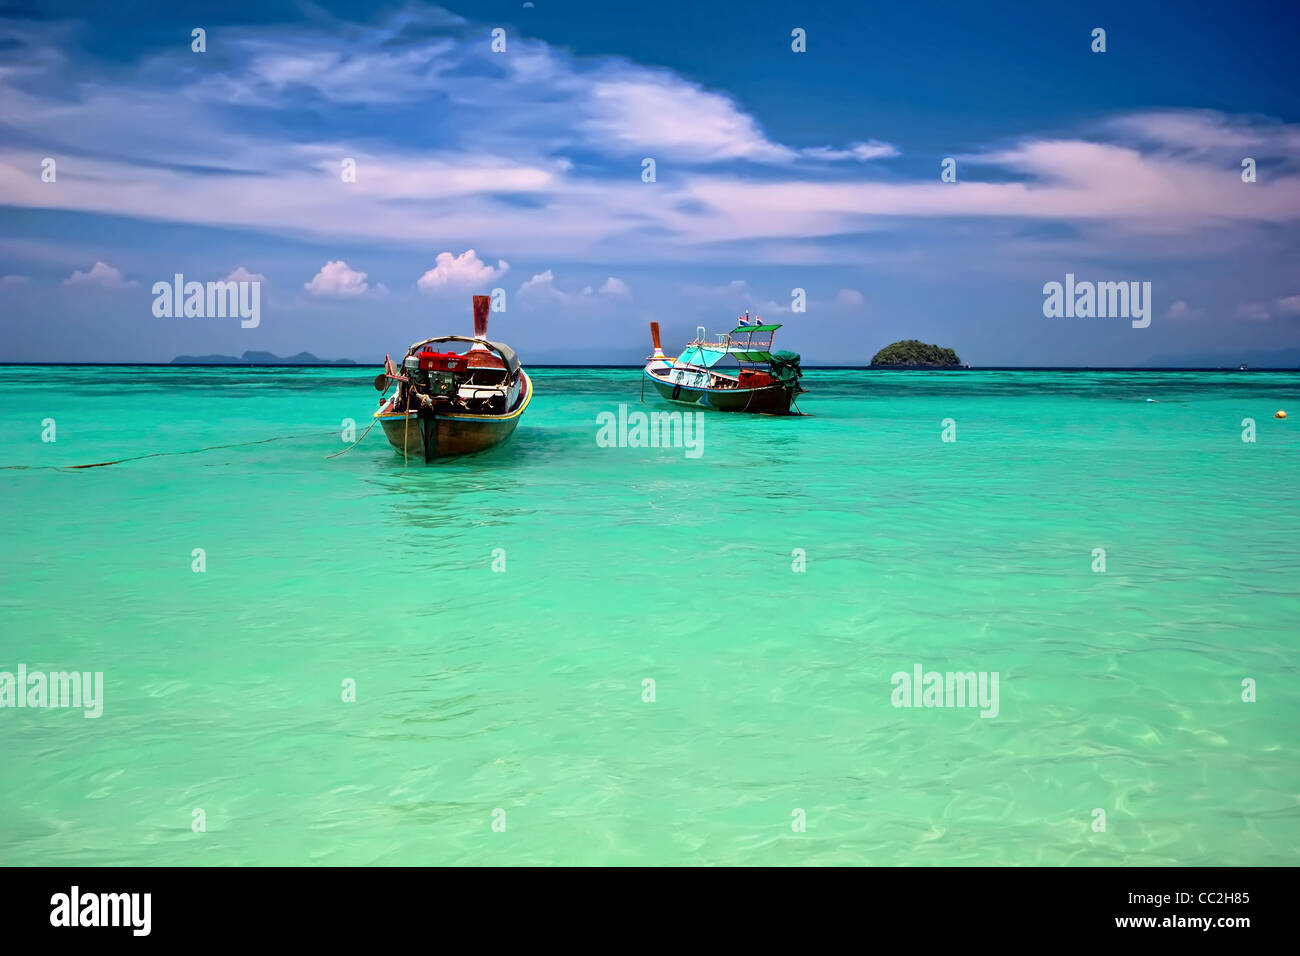 Emerald seas and blue skies on the Andaman Sea Island of  Koh Lipe located in Satun Province in the deep South of Thailand. Stock Photo